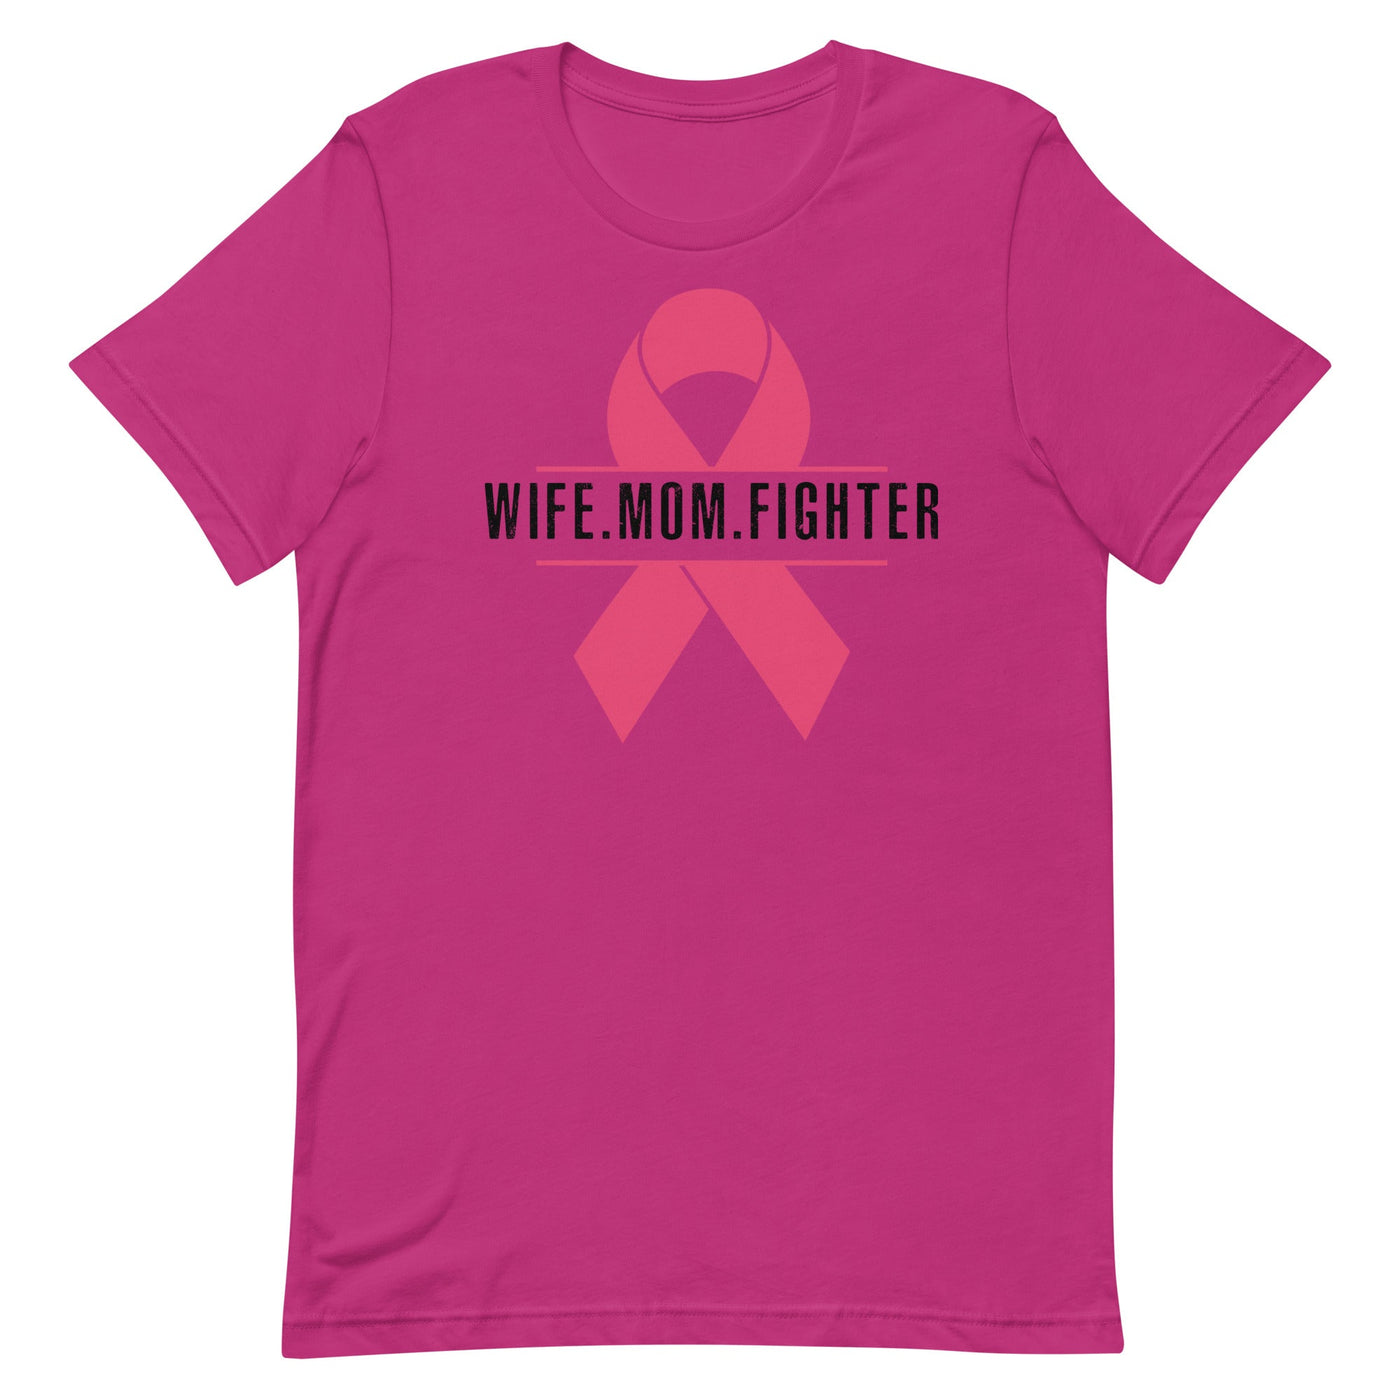 WIFE. MOM. FIGHTER - WOMEN'S T-SHIRT- BLACK FONT Berry S 